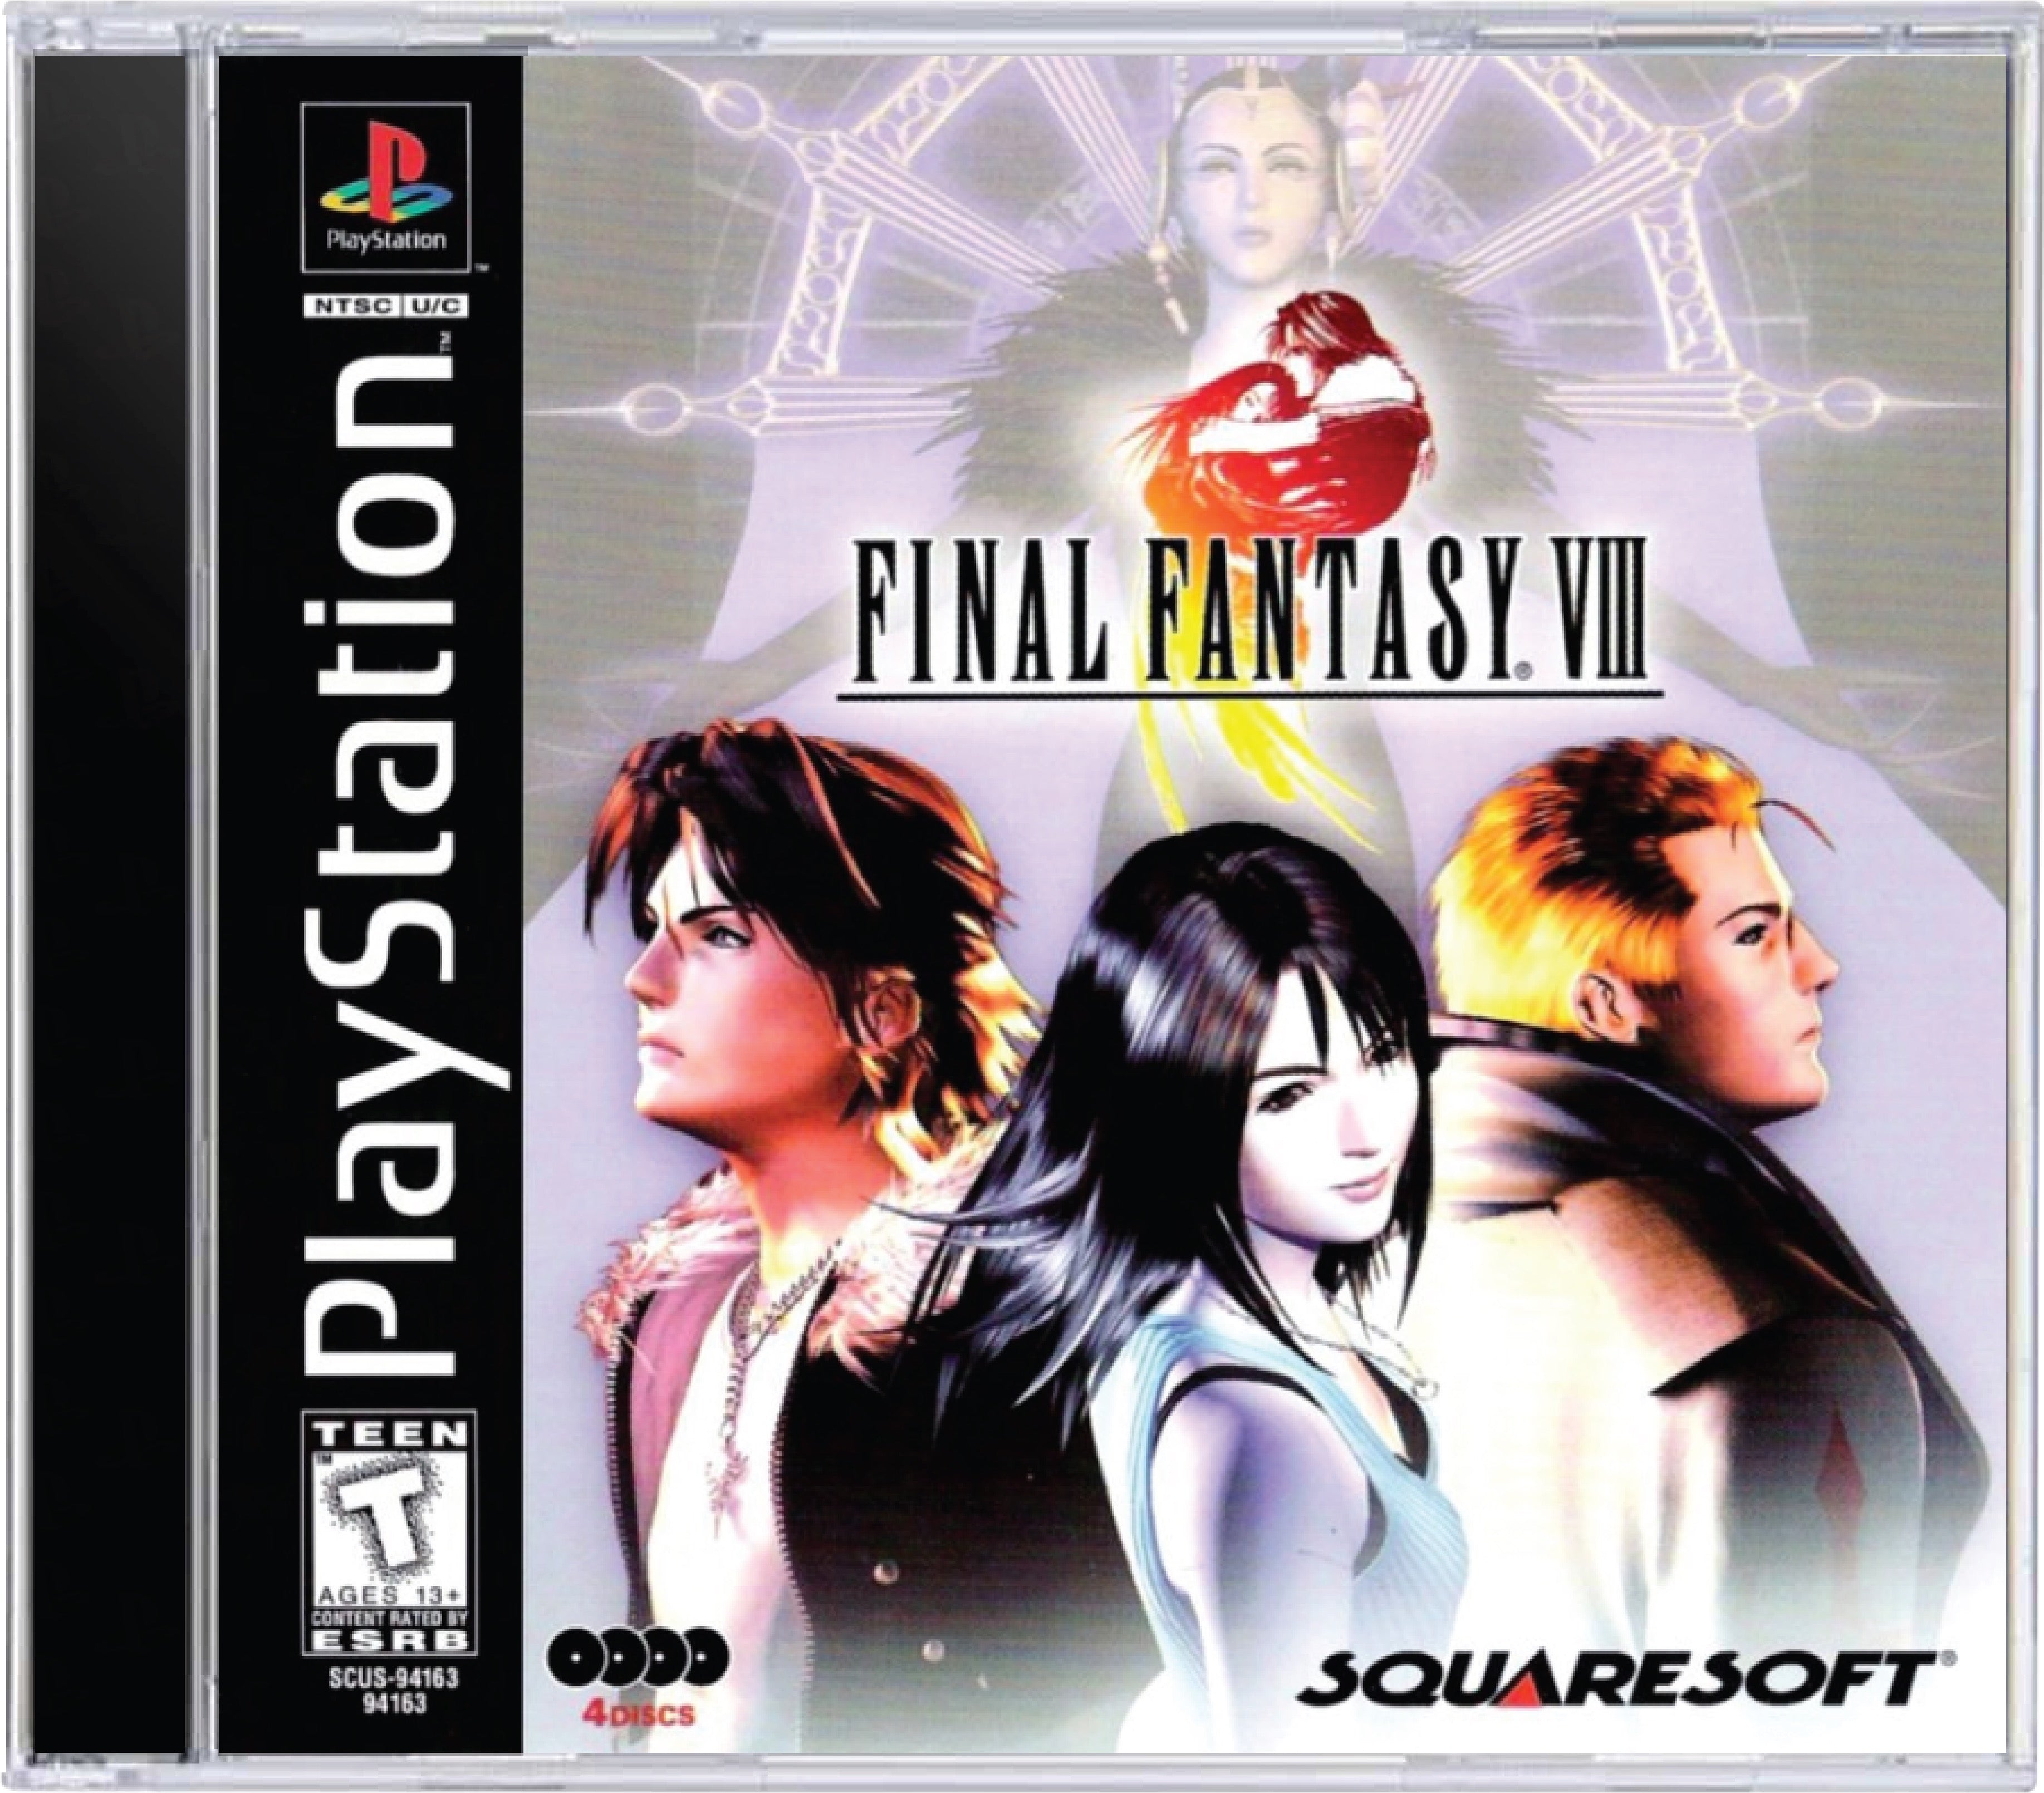 Final Fantasy VIII Cover Art and Product Photo